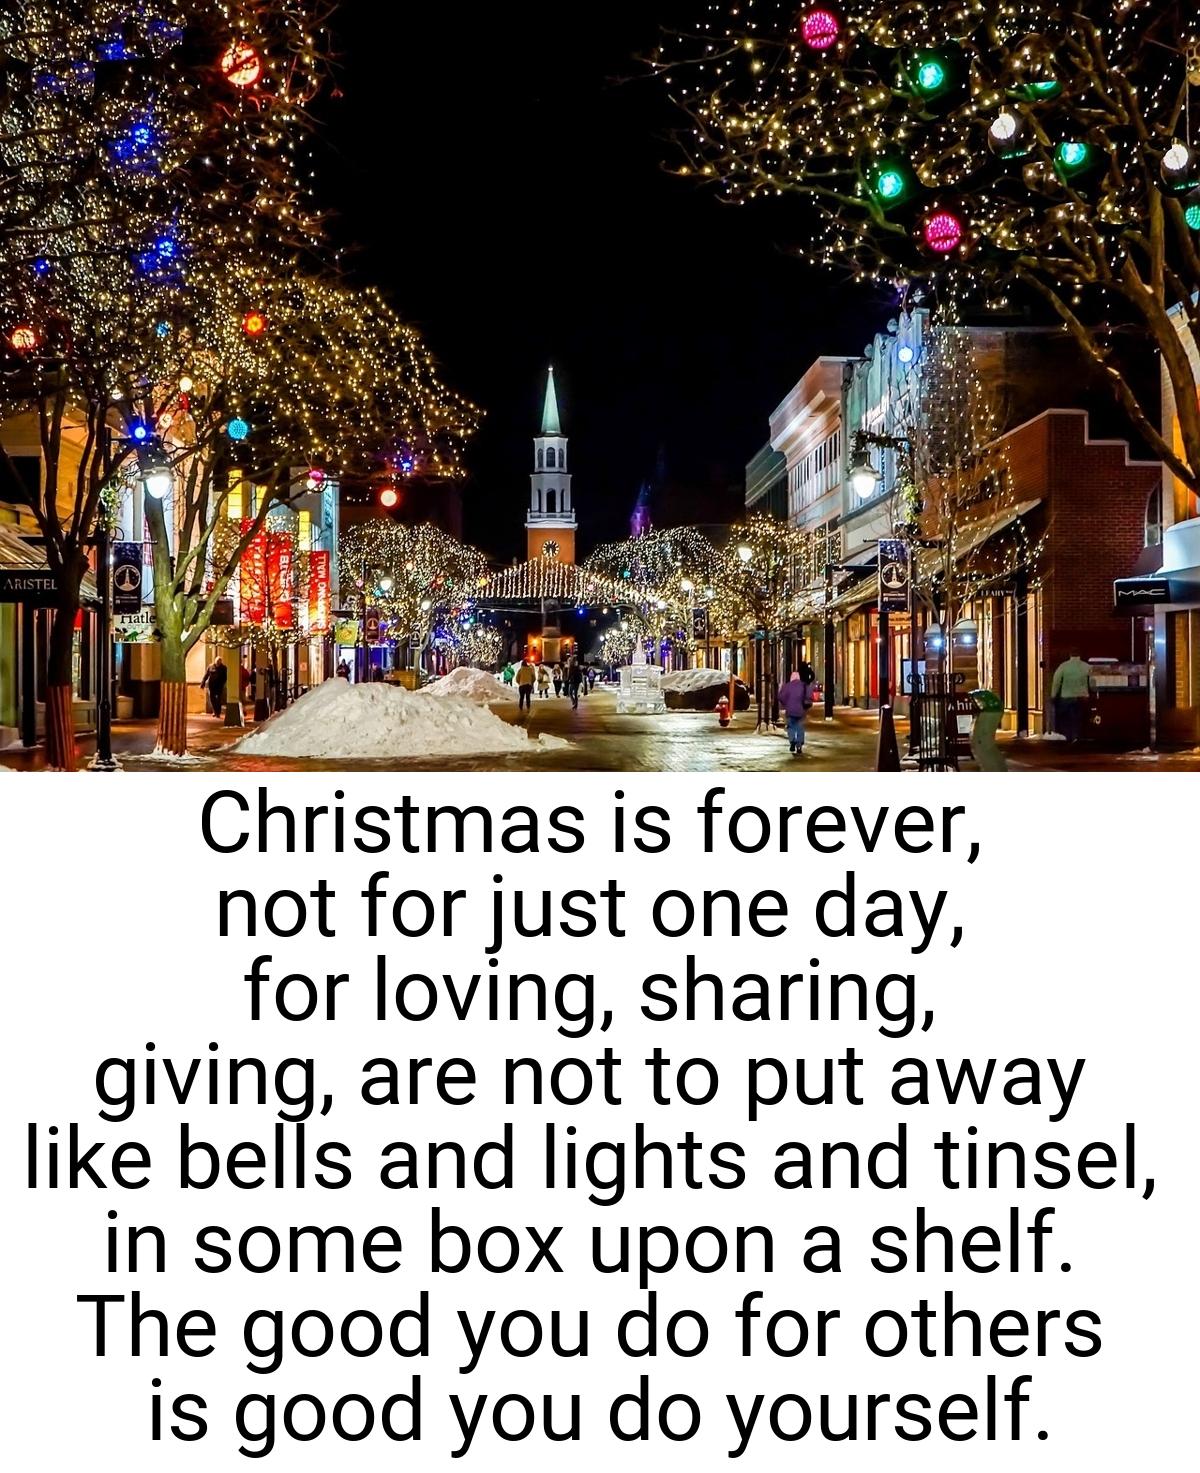 Christmas is forever, not for just one day, for loving